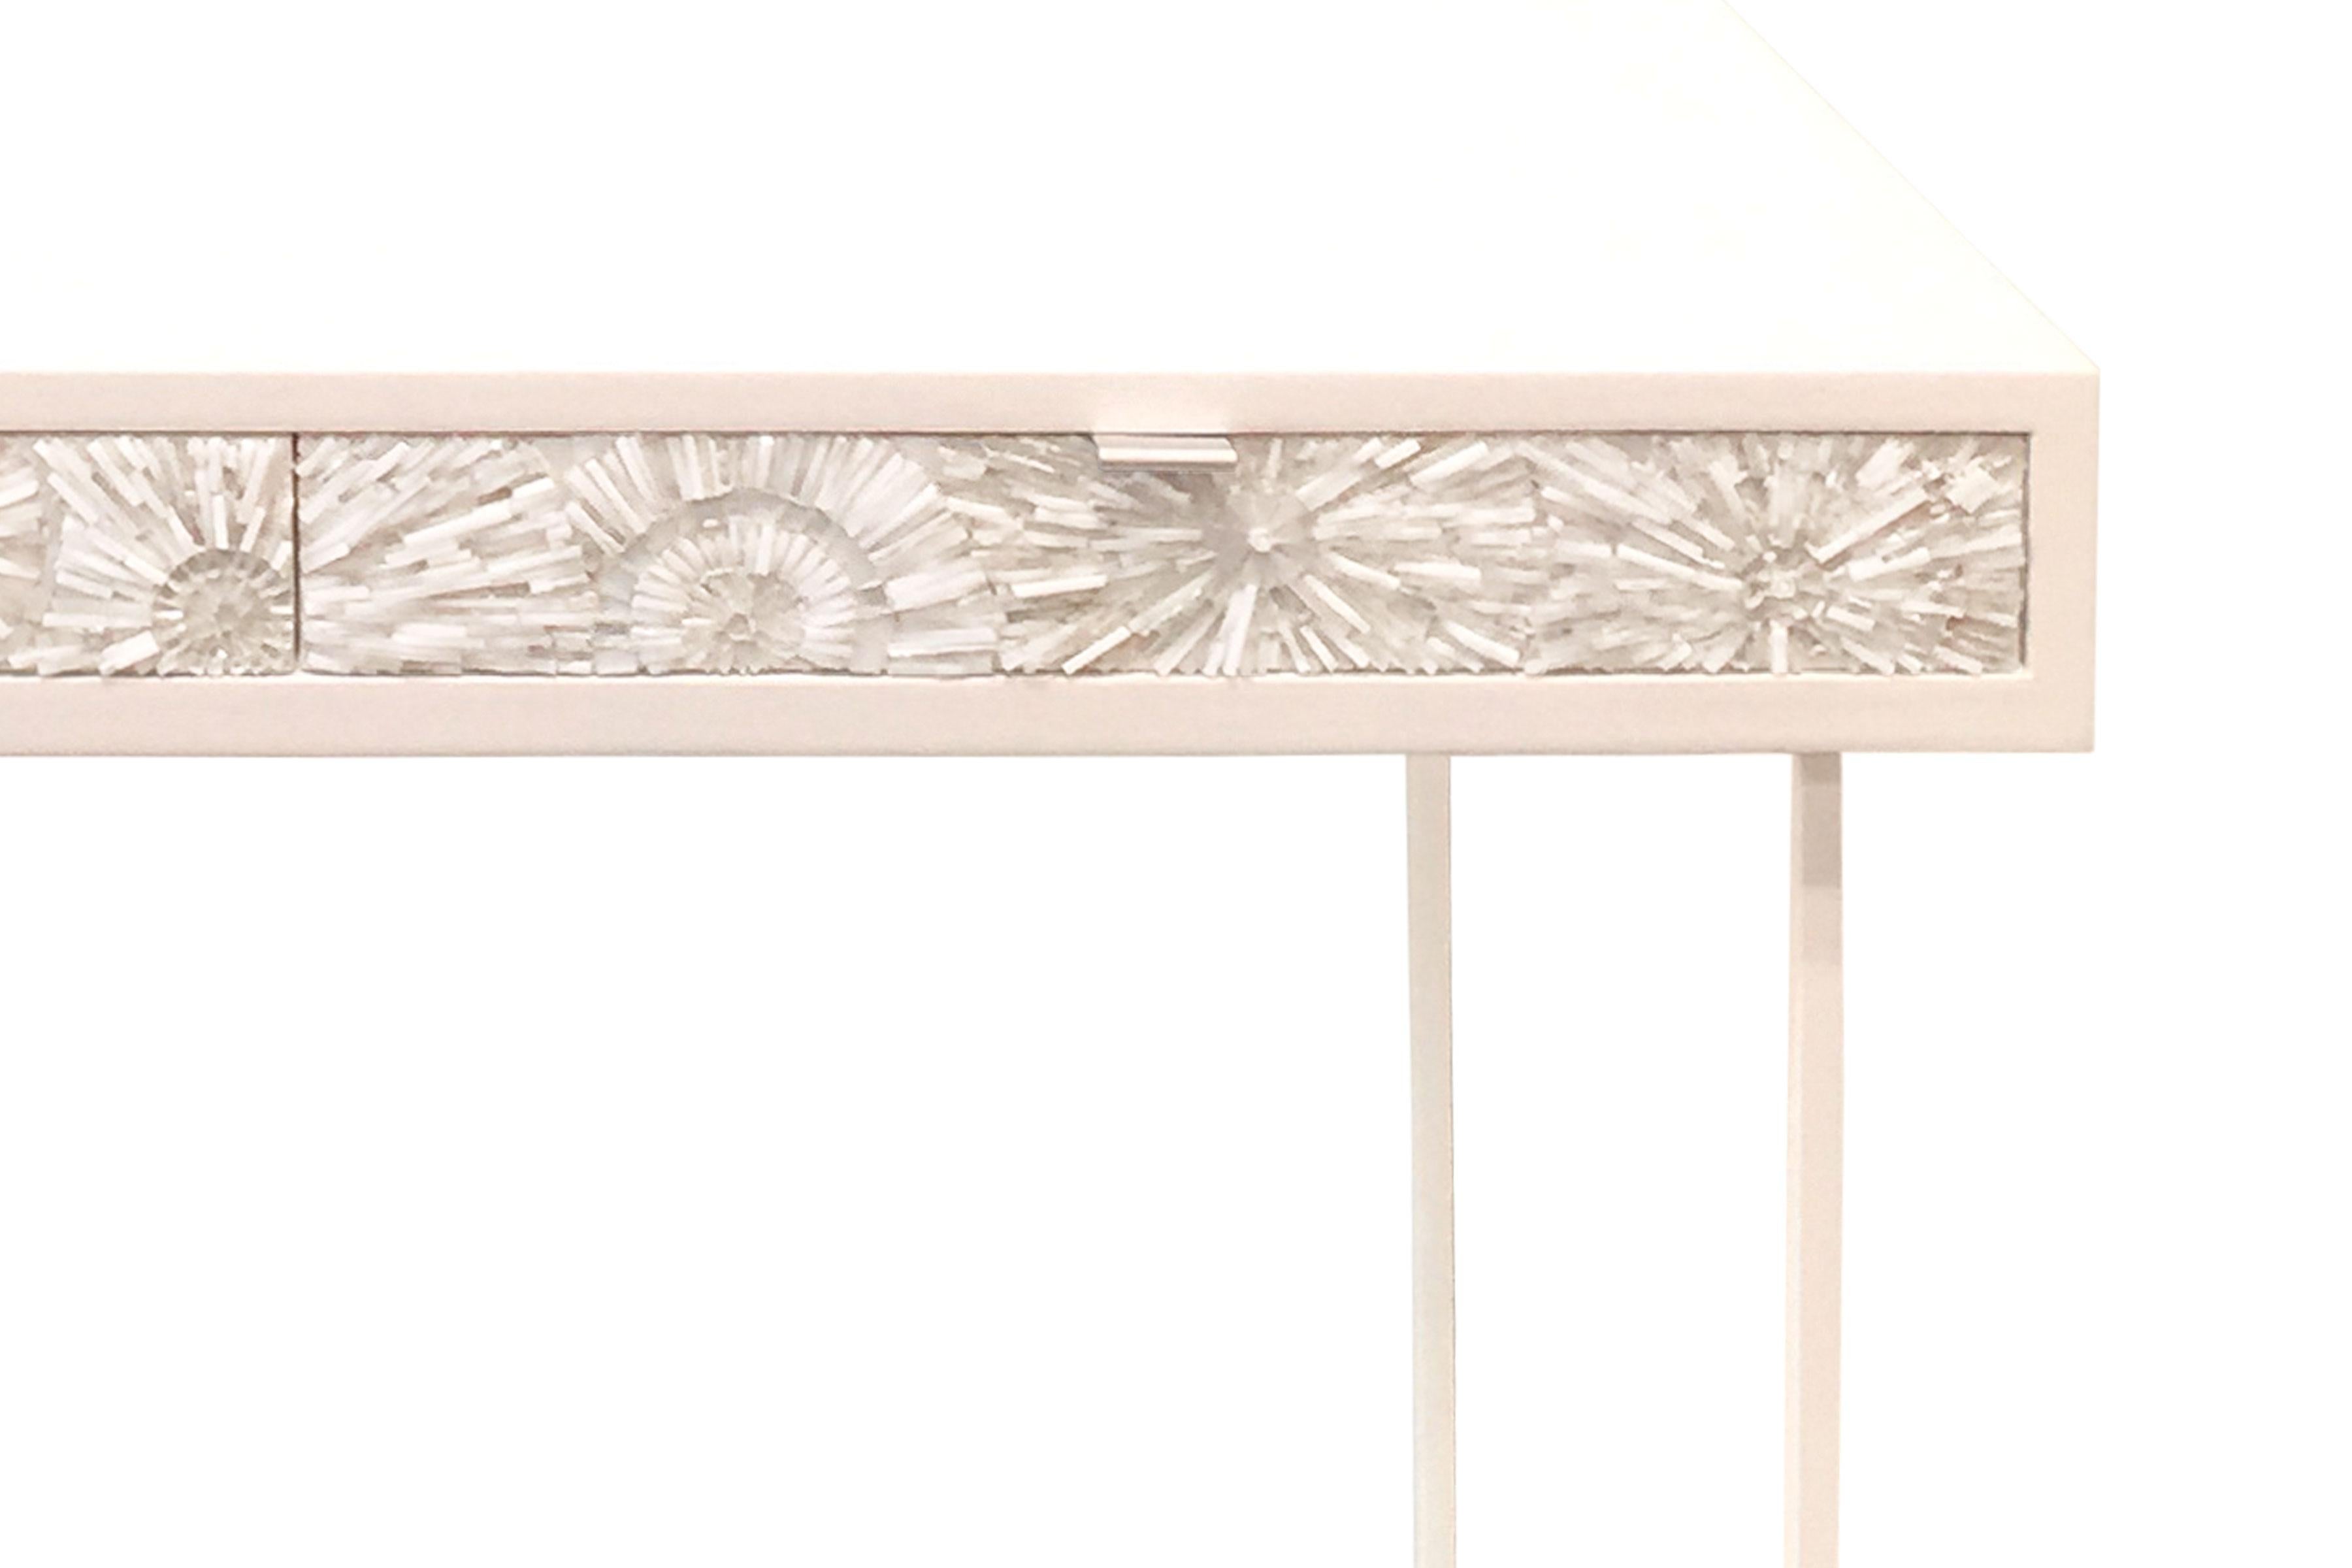 The Pavia Blossom desk/vanity by Ercole Home has a 2-drawer, with a painted white wood finish on oak.
Handcut glass mosaics in white and silver decorate the drawer fronts in blossom (3-dimensional flowers) pattern.
There are two aluminium pulls in